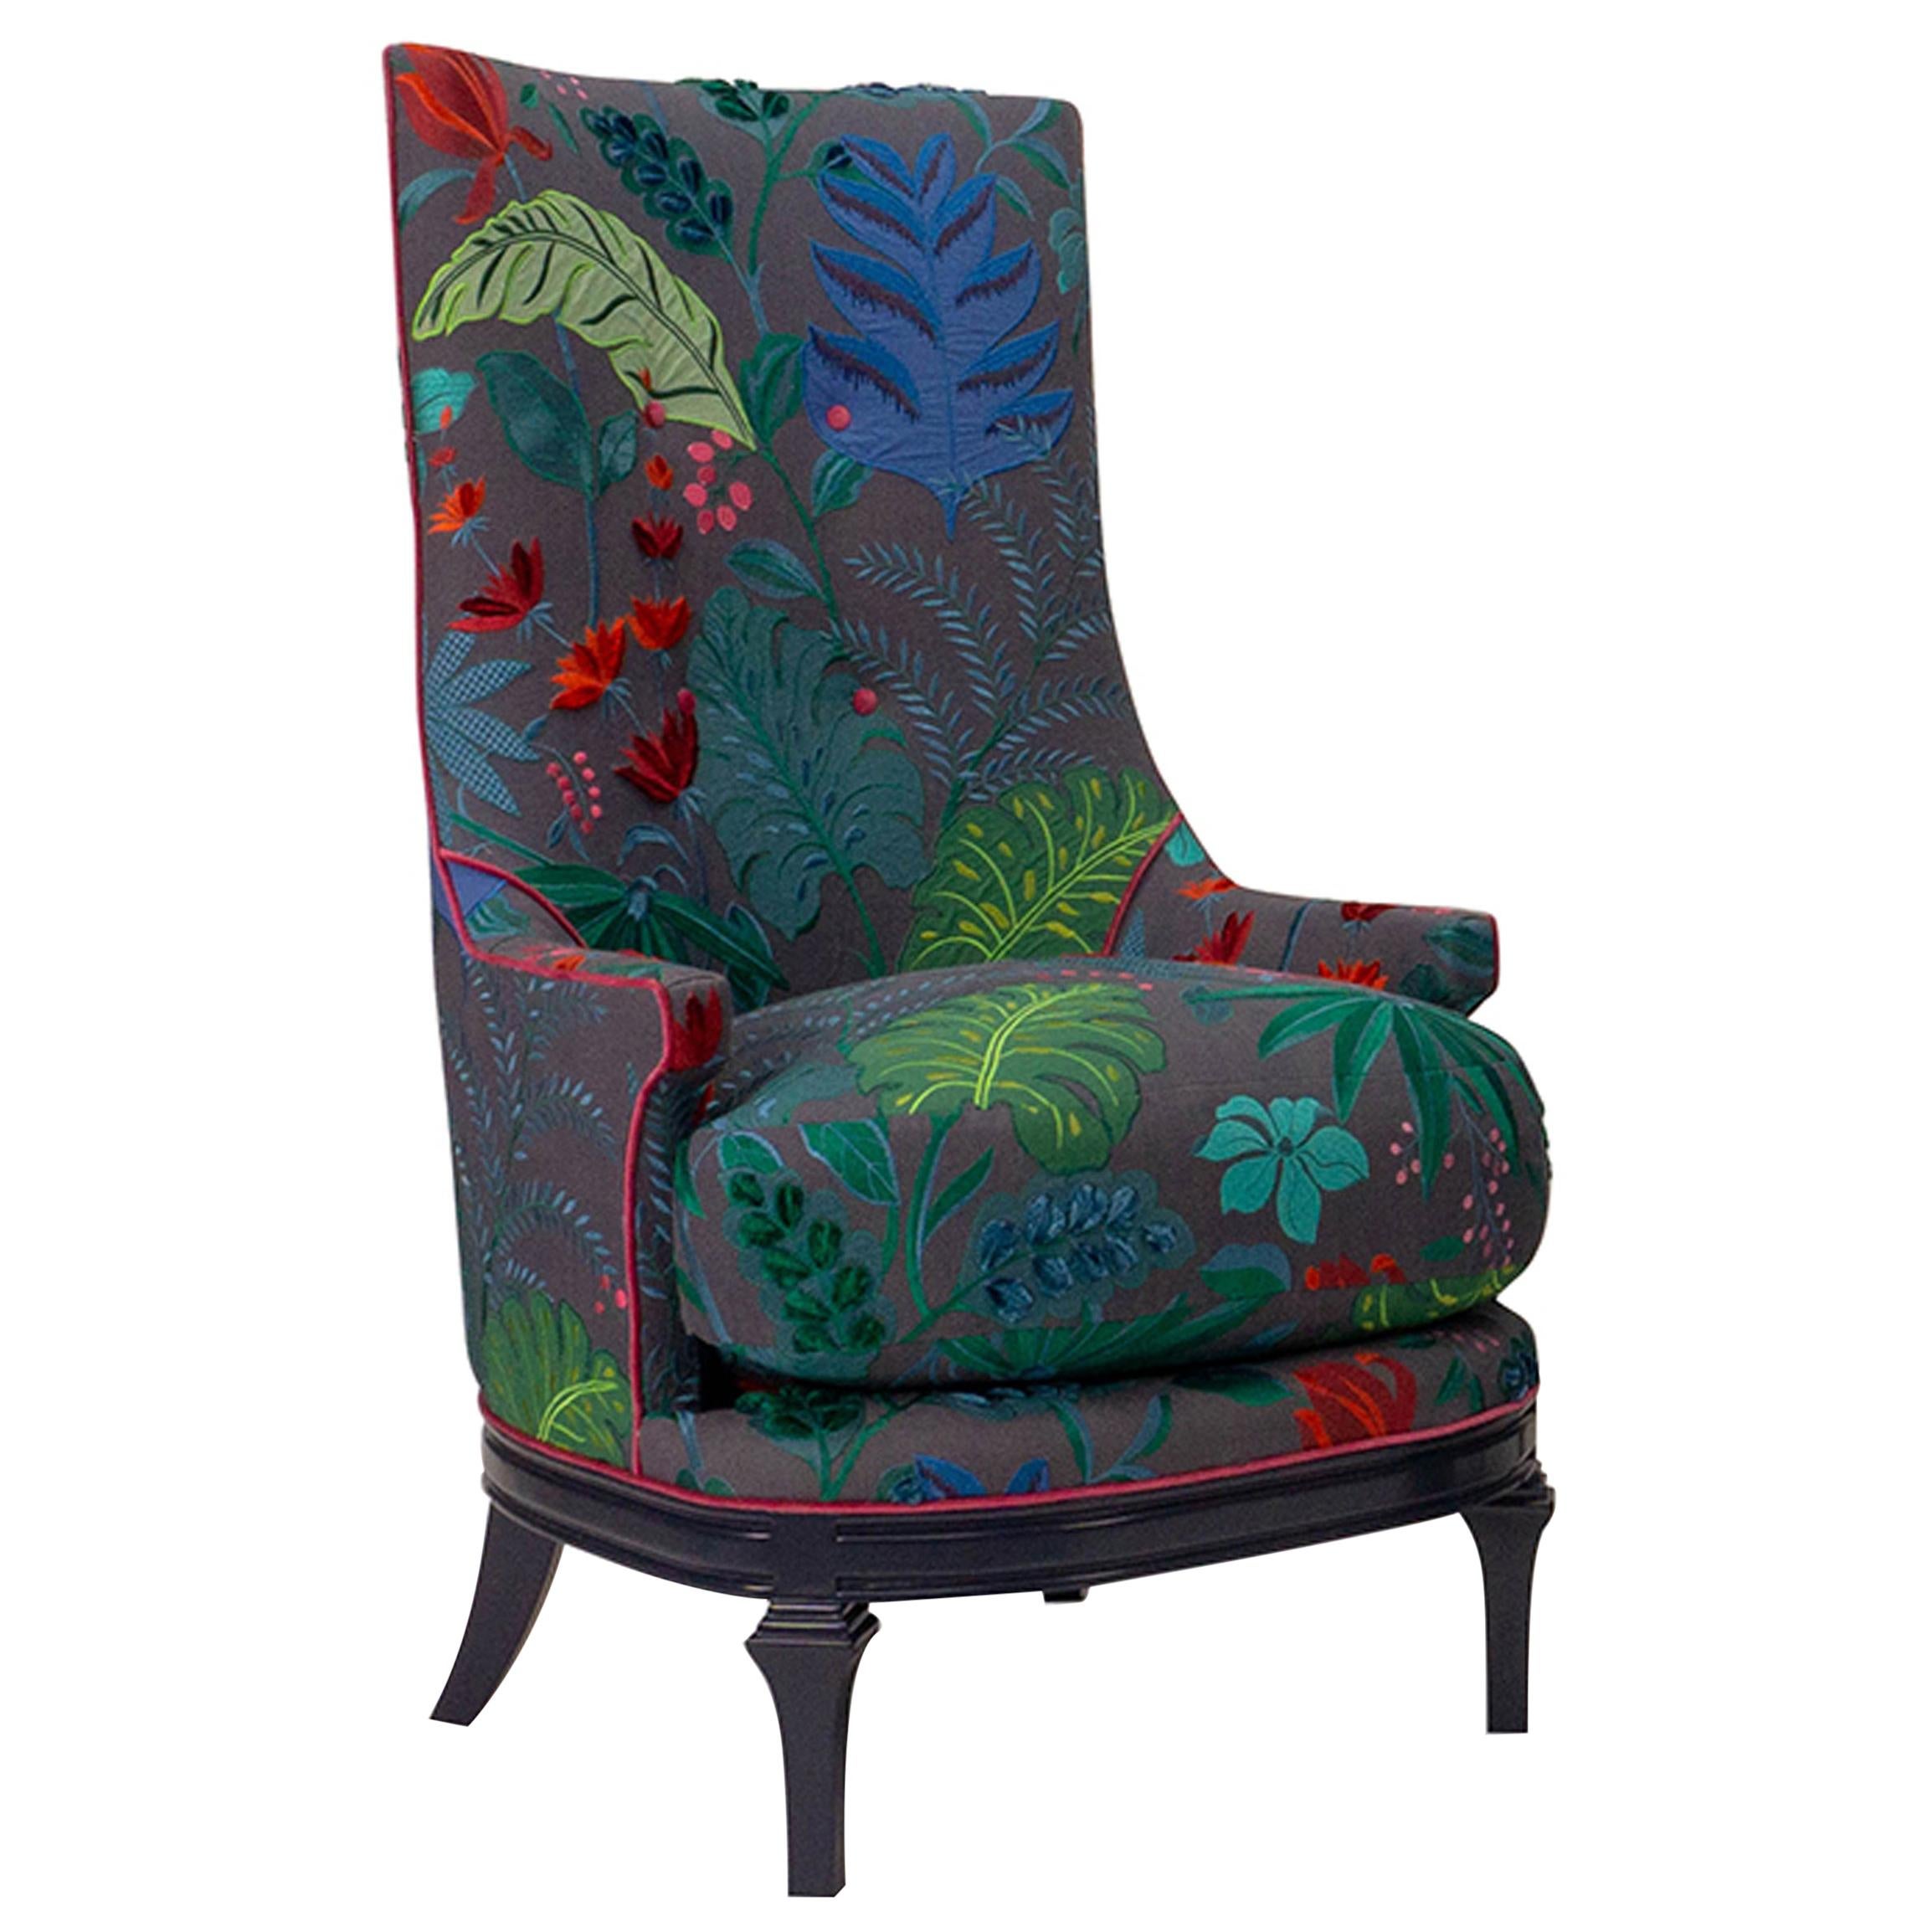 High Back Barrel Chair in Colorful Floral Embroidered Linen